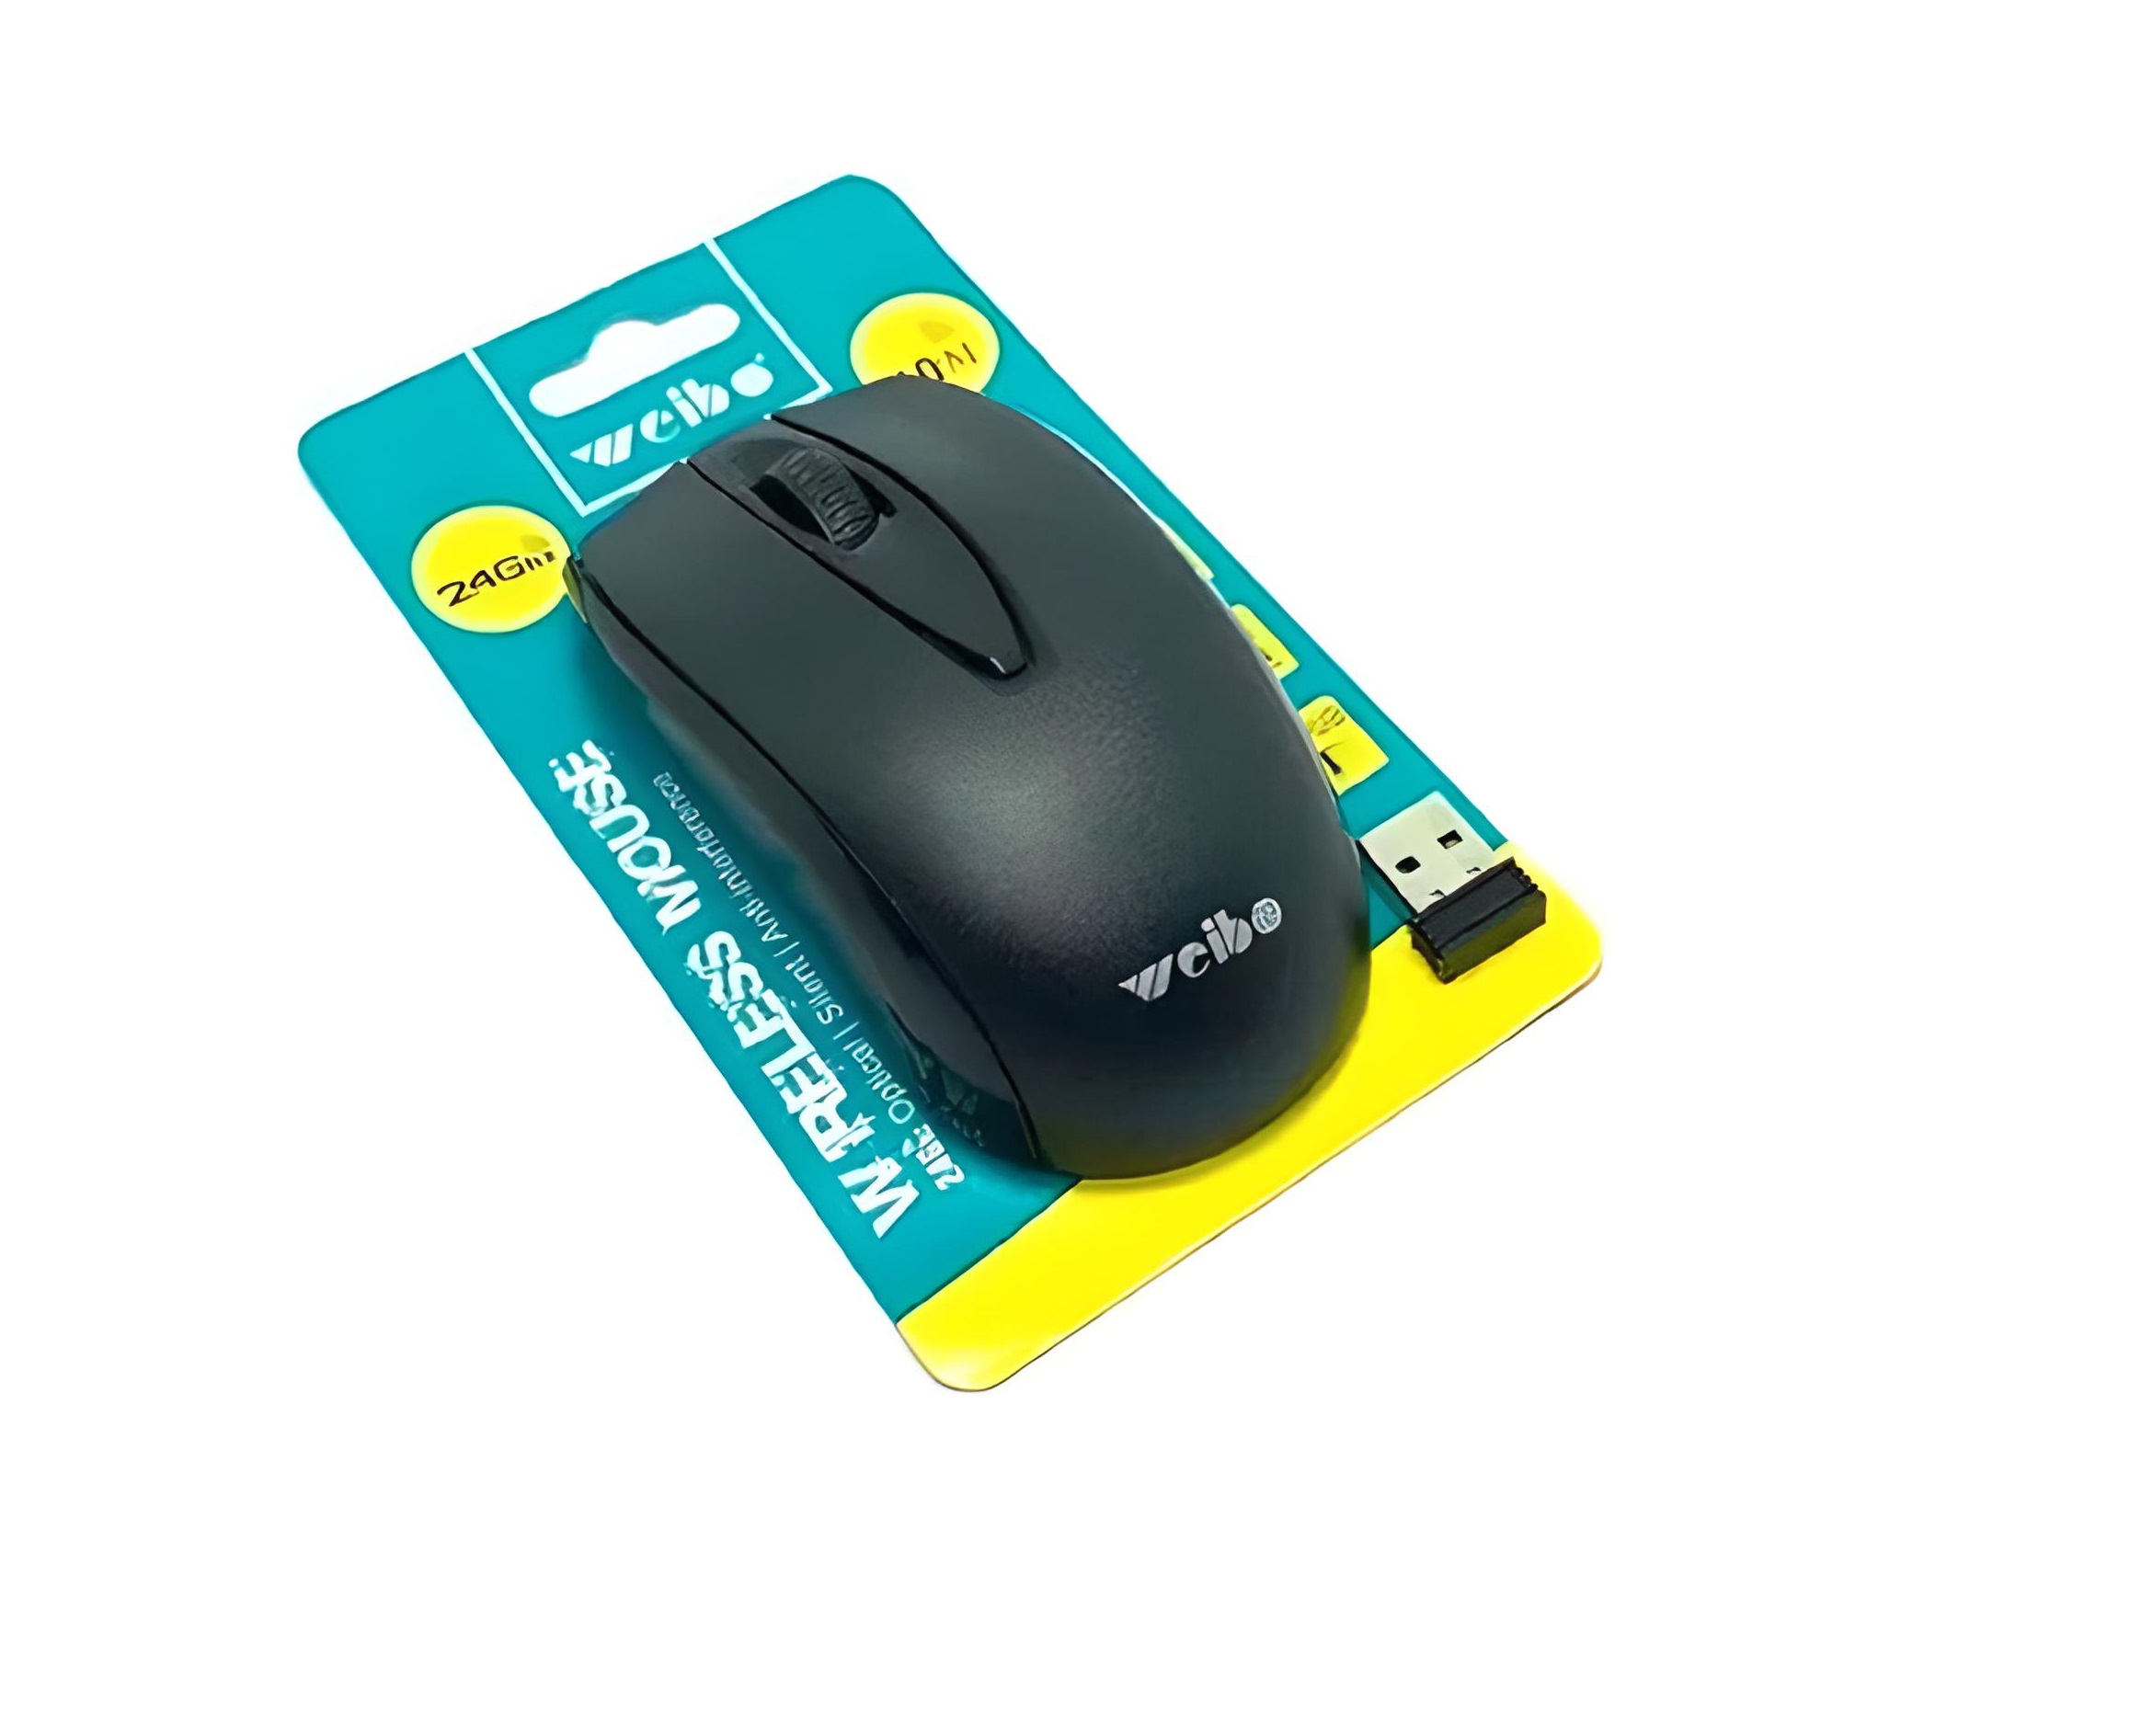 MOUSE INALAMBRICO WEIBO 2.4GHZ